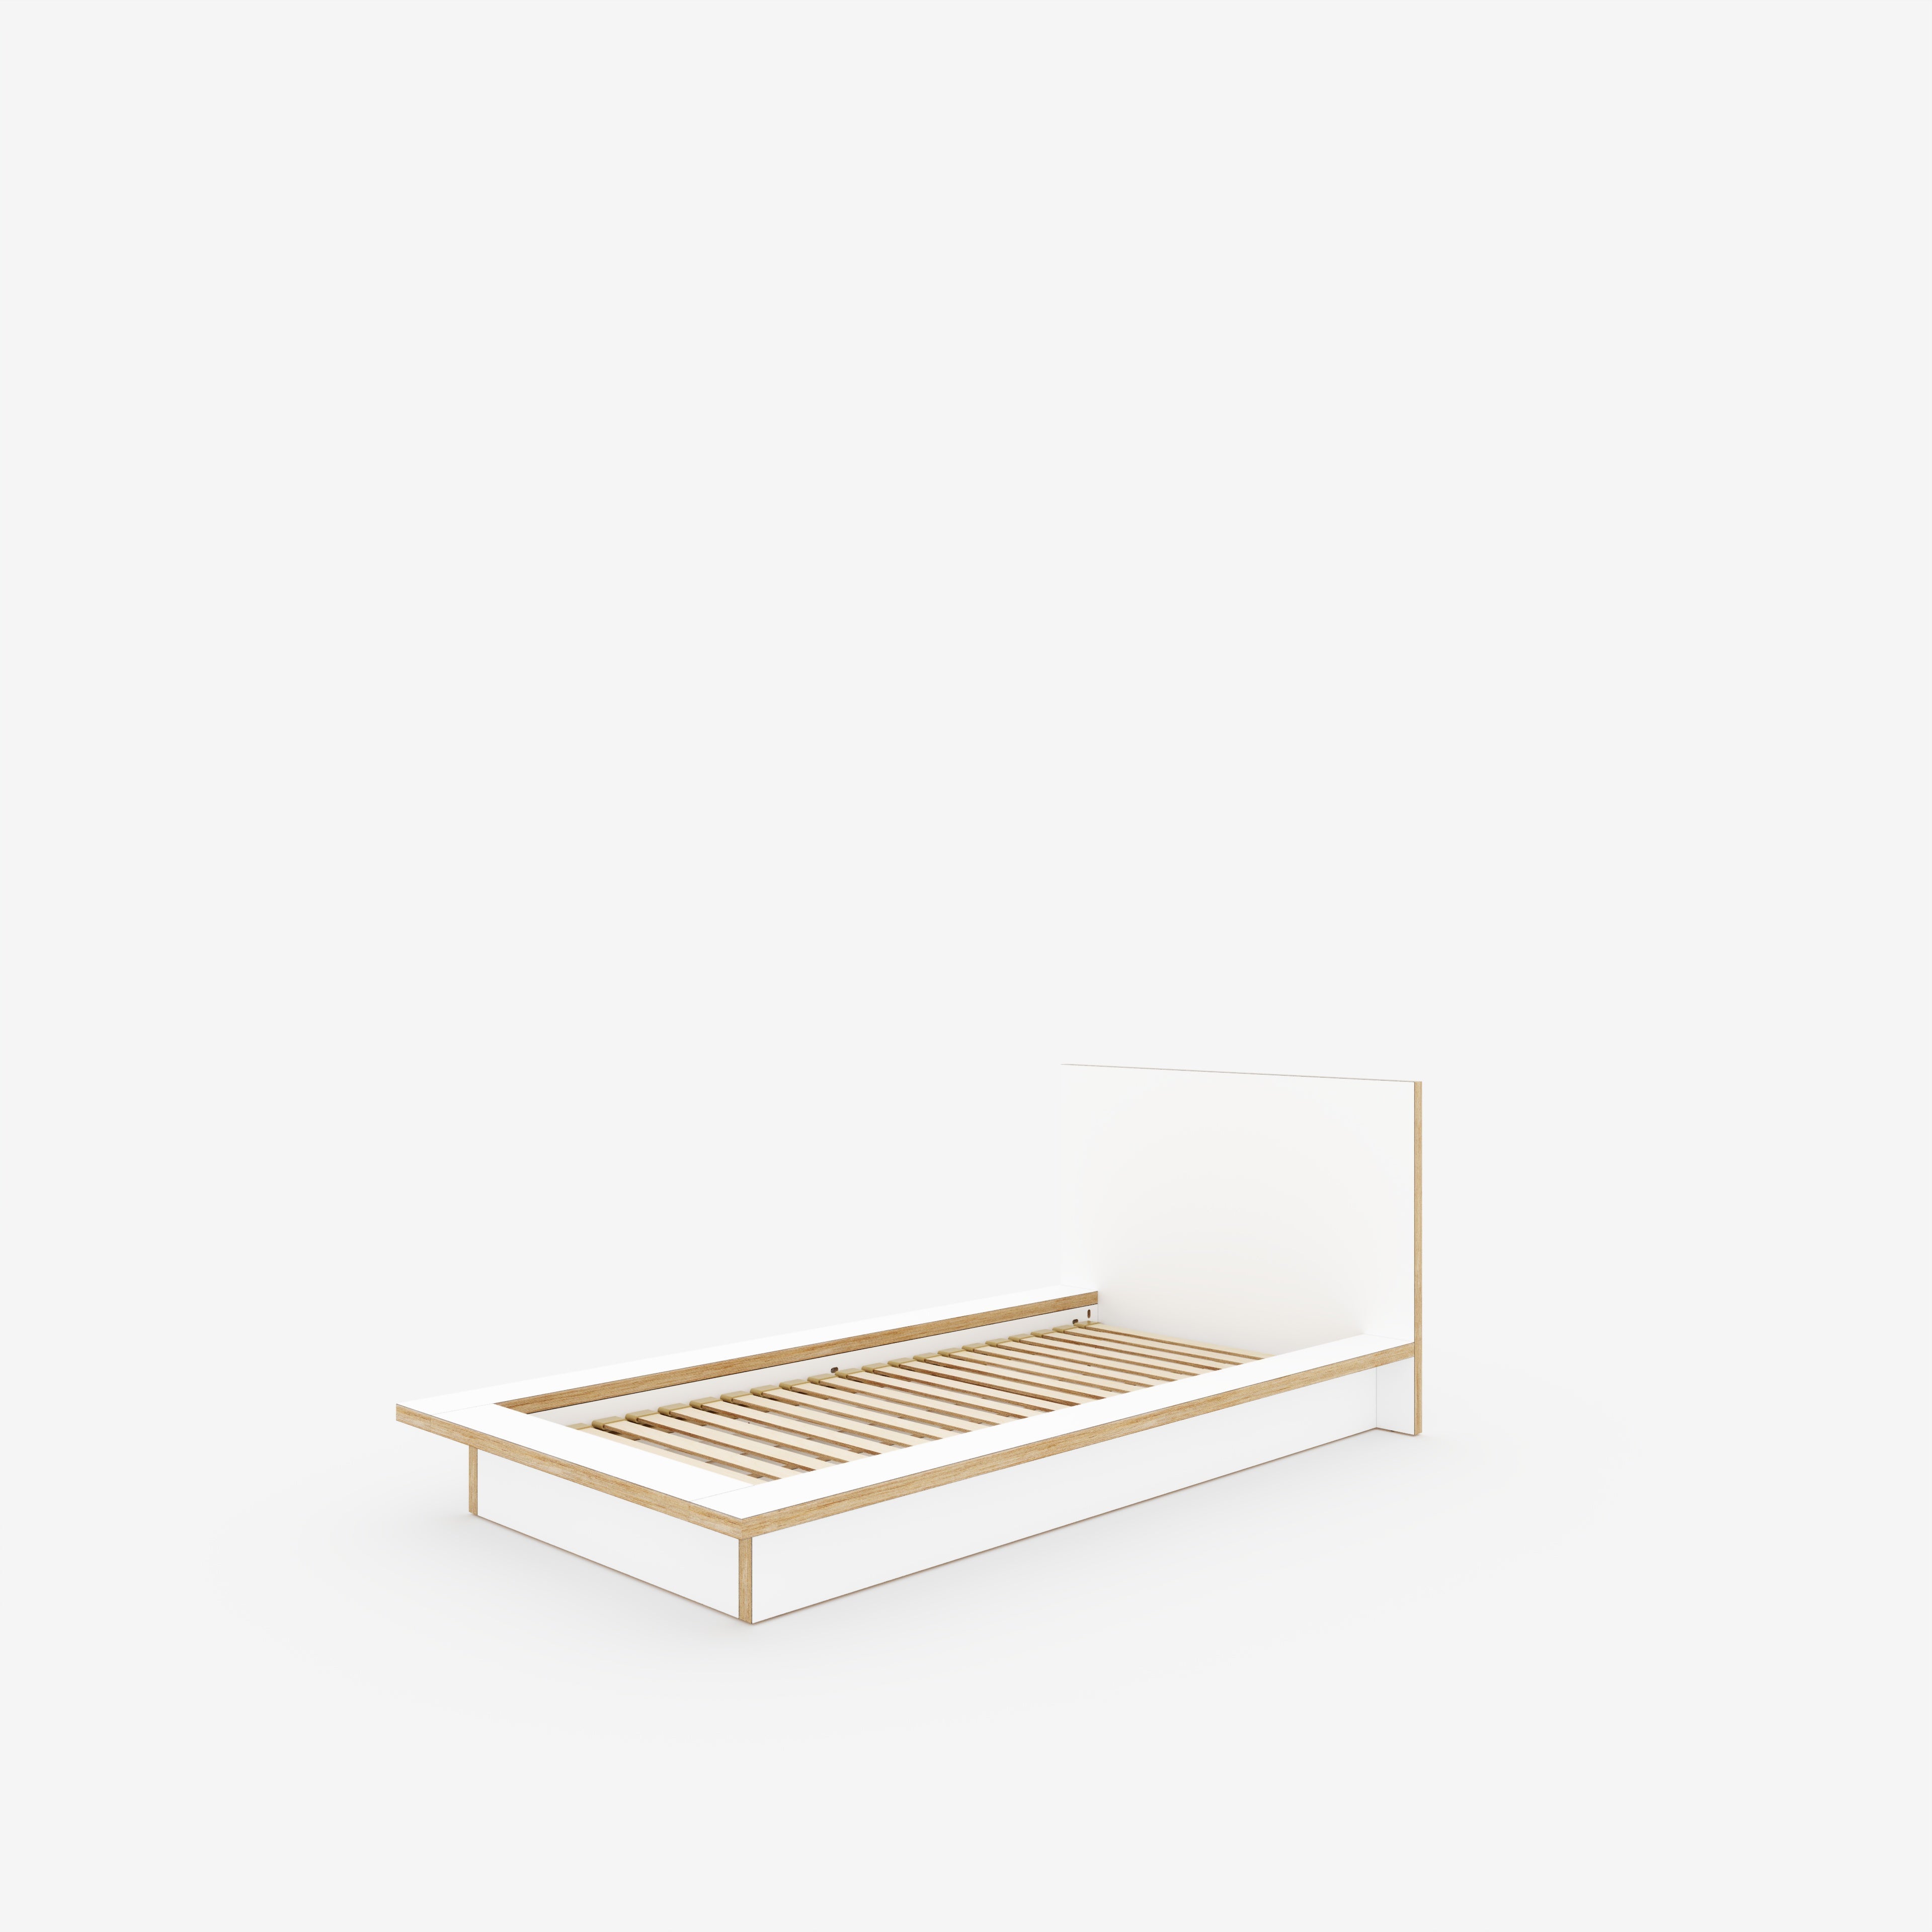 Plywood Platform Bed - Plywood Formica White - European Single 900(w) x 2000(d) Low